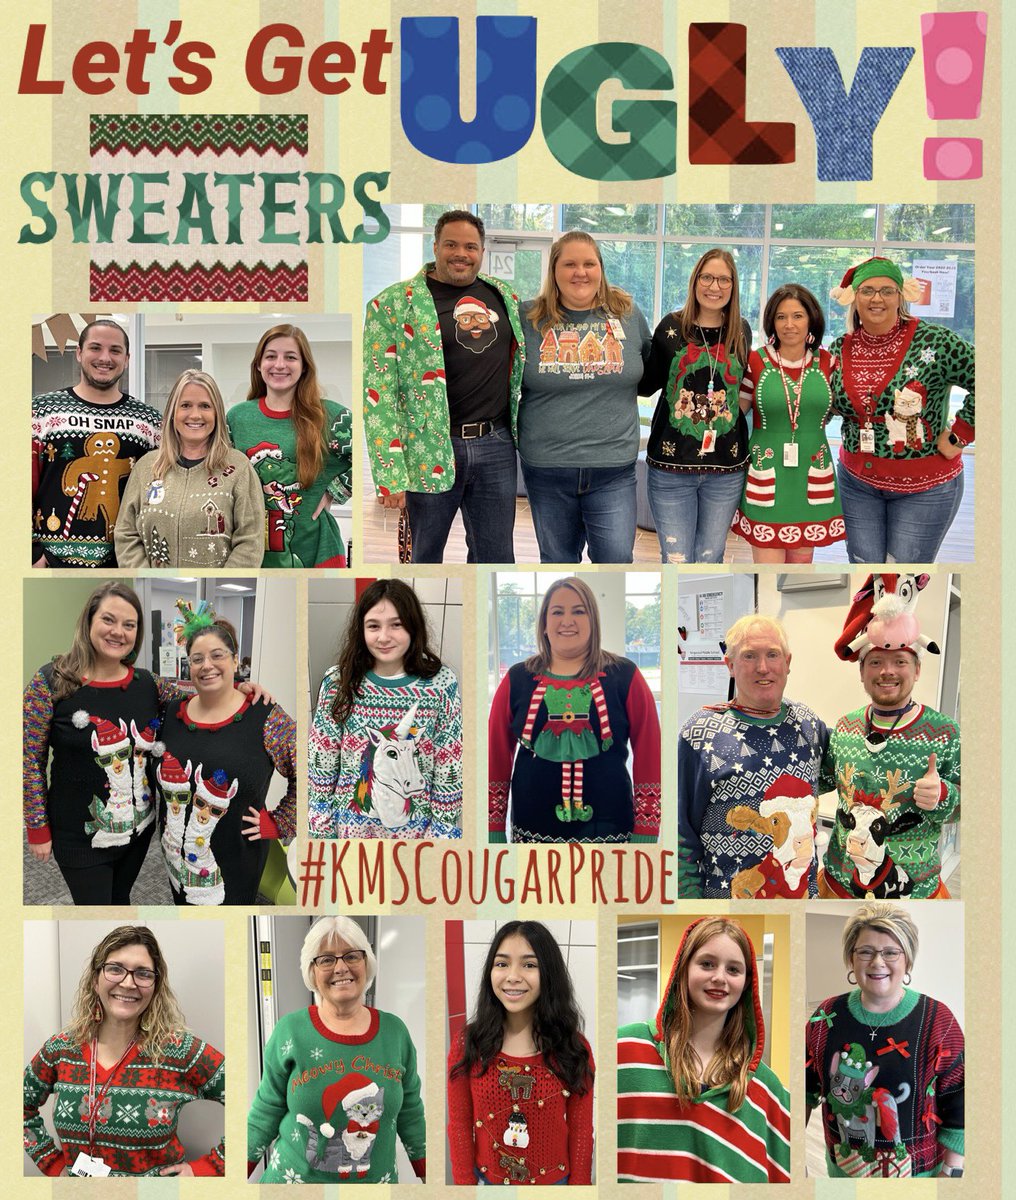 ❄️‘Tis the Season to Rock UGLY Sweaters!❄️ #KMSCougarPride #UglySweaterDay #LetsGetUgly